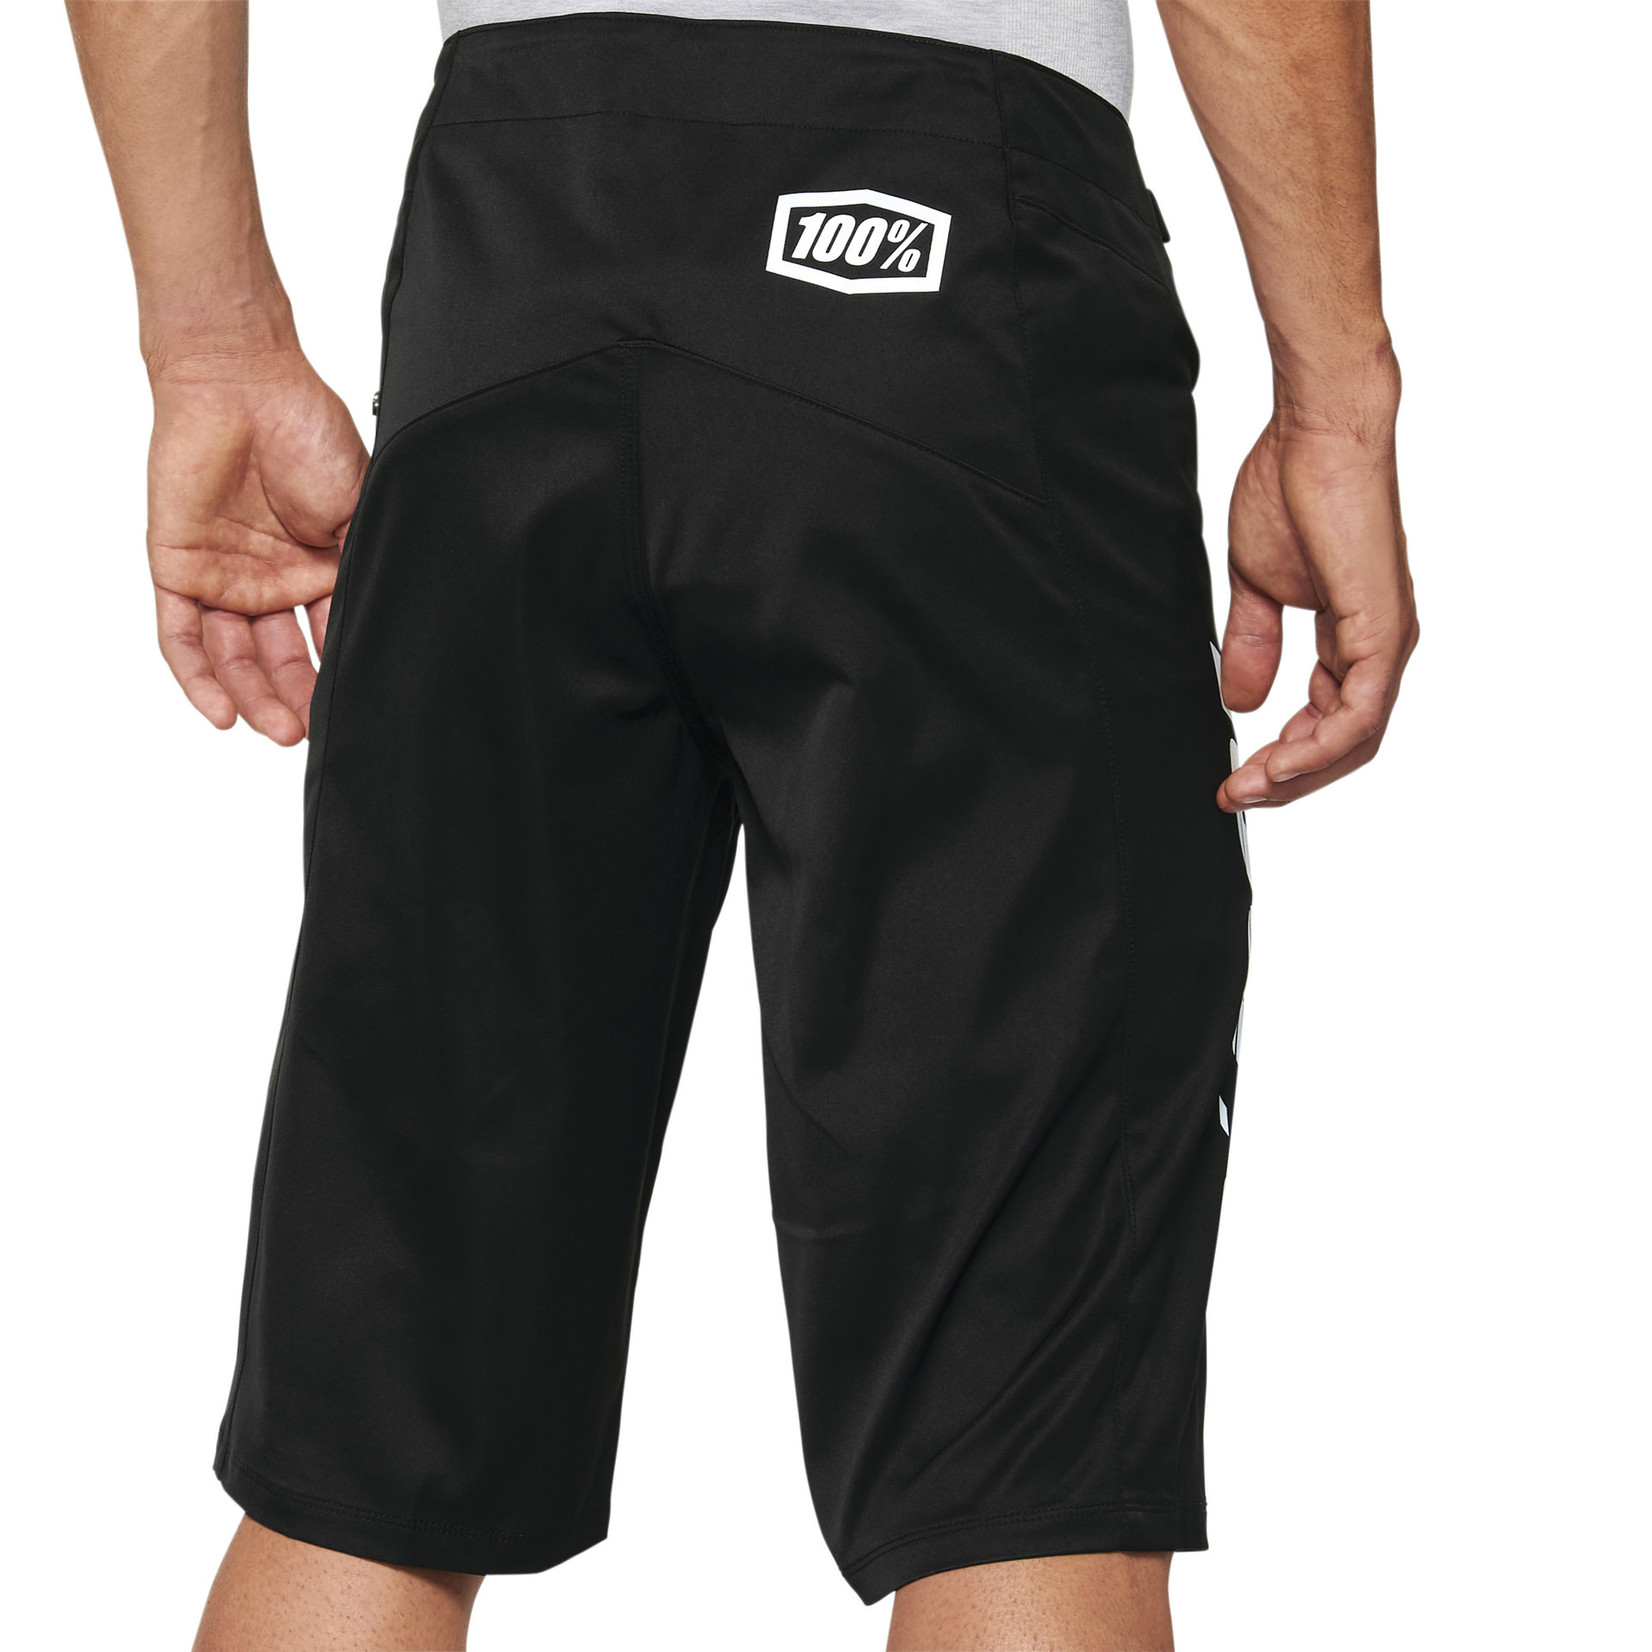 100 Percent 100% R-Core Bike Cycling Shorts - Black Material 100% Polyester